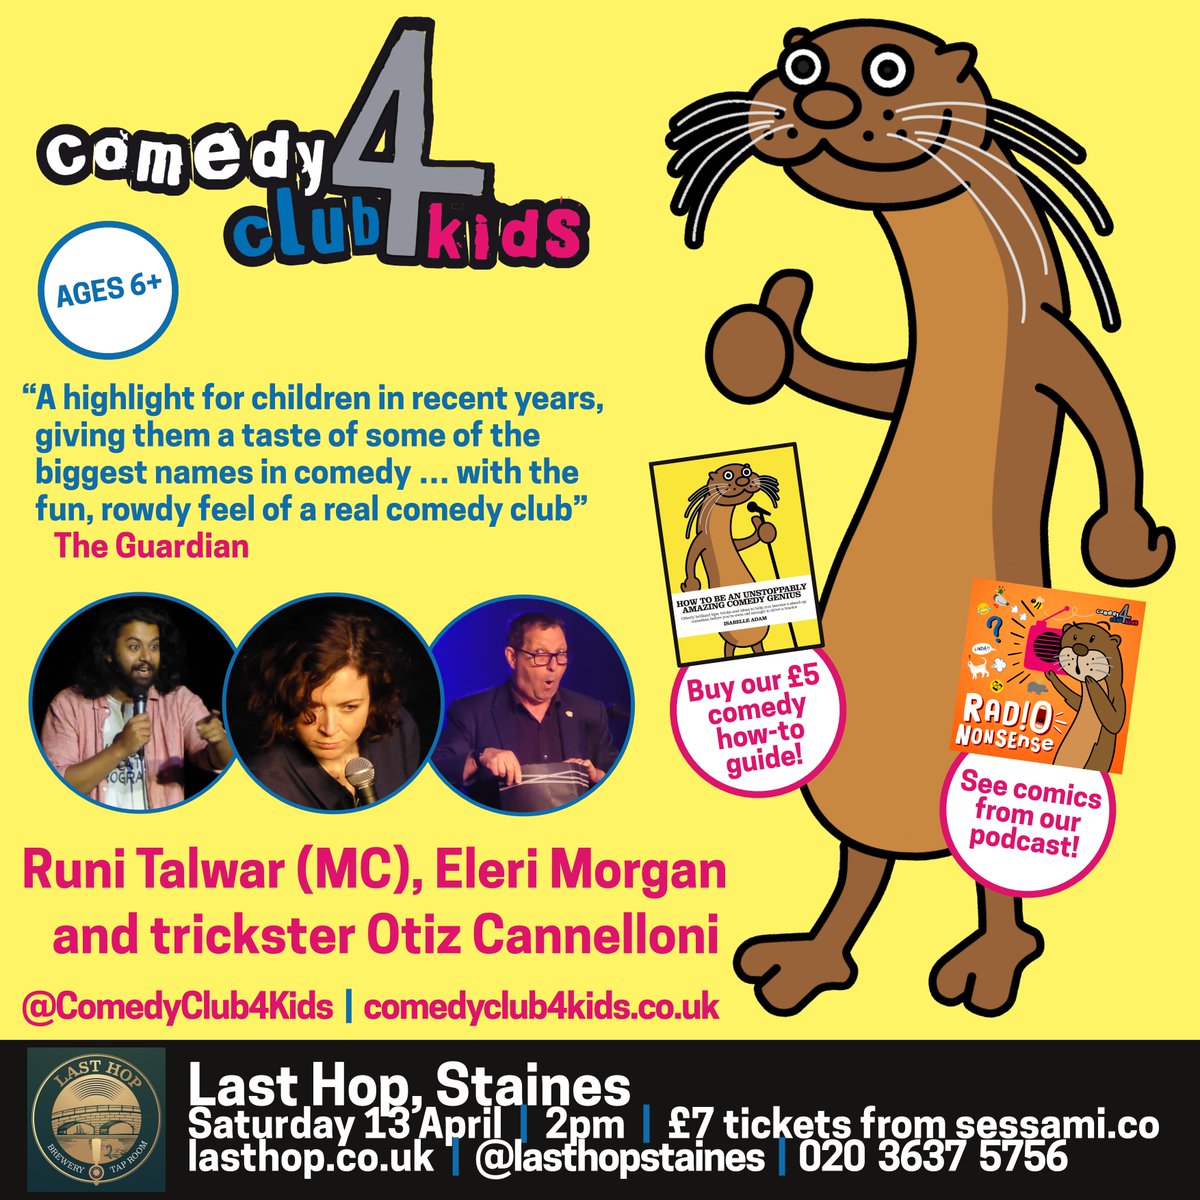 Staines! Children of Surrey! We're doing an Easter Special at @LastHopStaines on Saturday 13th April - join us for comedy excellence and much giggling with @runitalwar, @Eleri_Morgan and @Otiz_Cannelloni! 🎟️sessami.co/events/1899990…